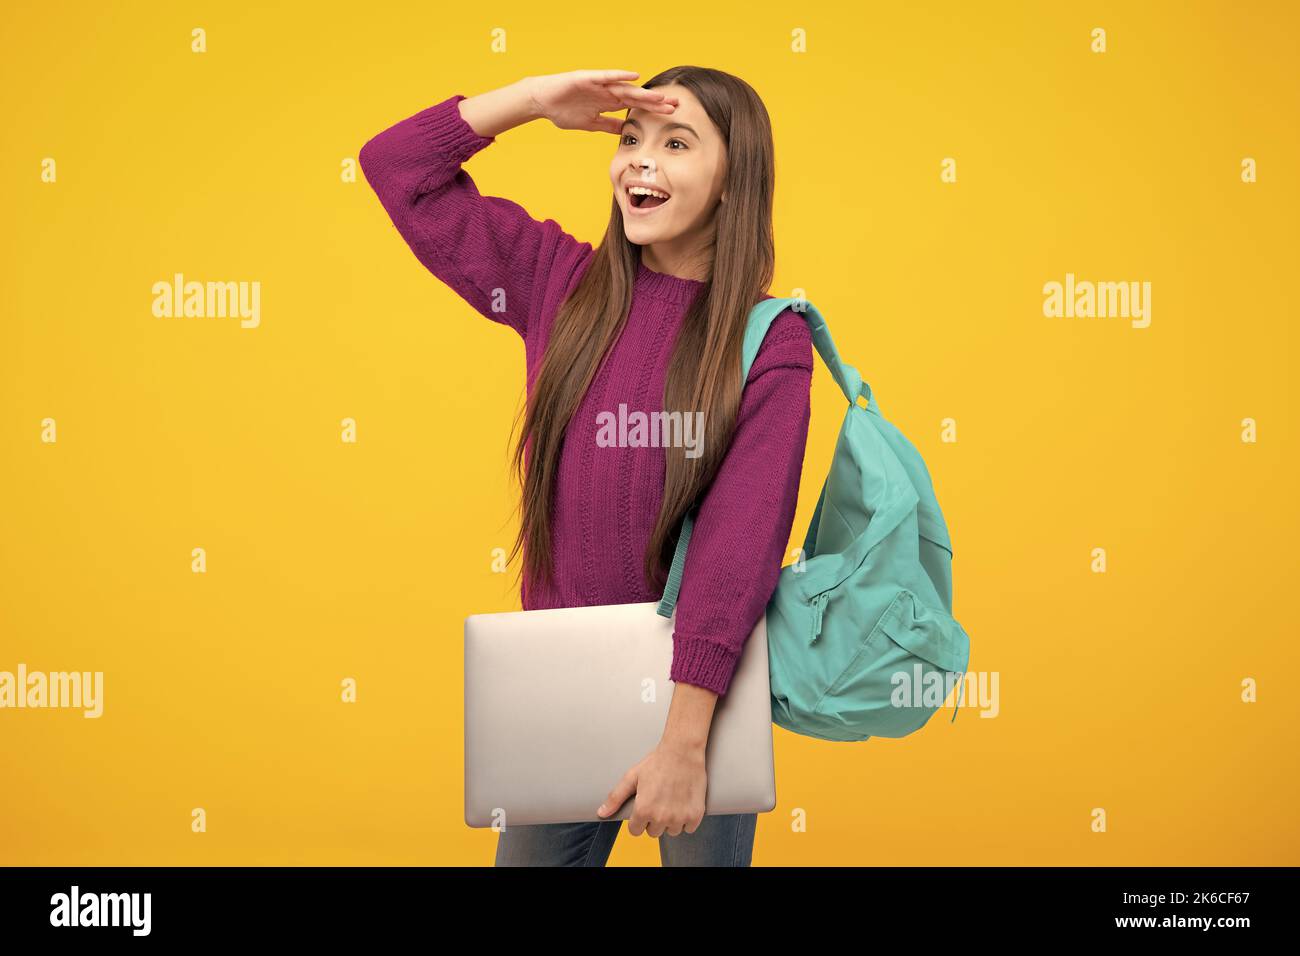 Excited face. Teen schoolgirl hold laptop on isolated studio background. Cchool student learning online, webinar, video lesson, distance education Stock Photo